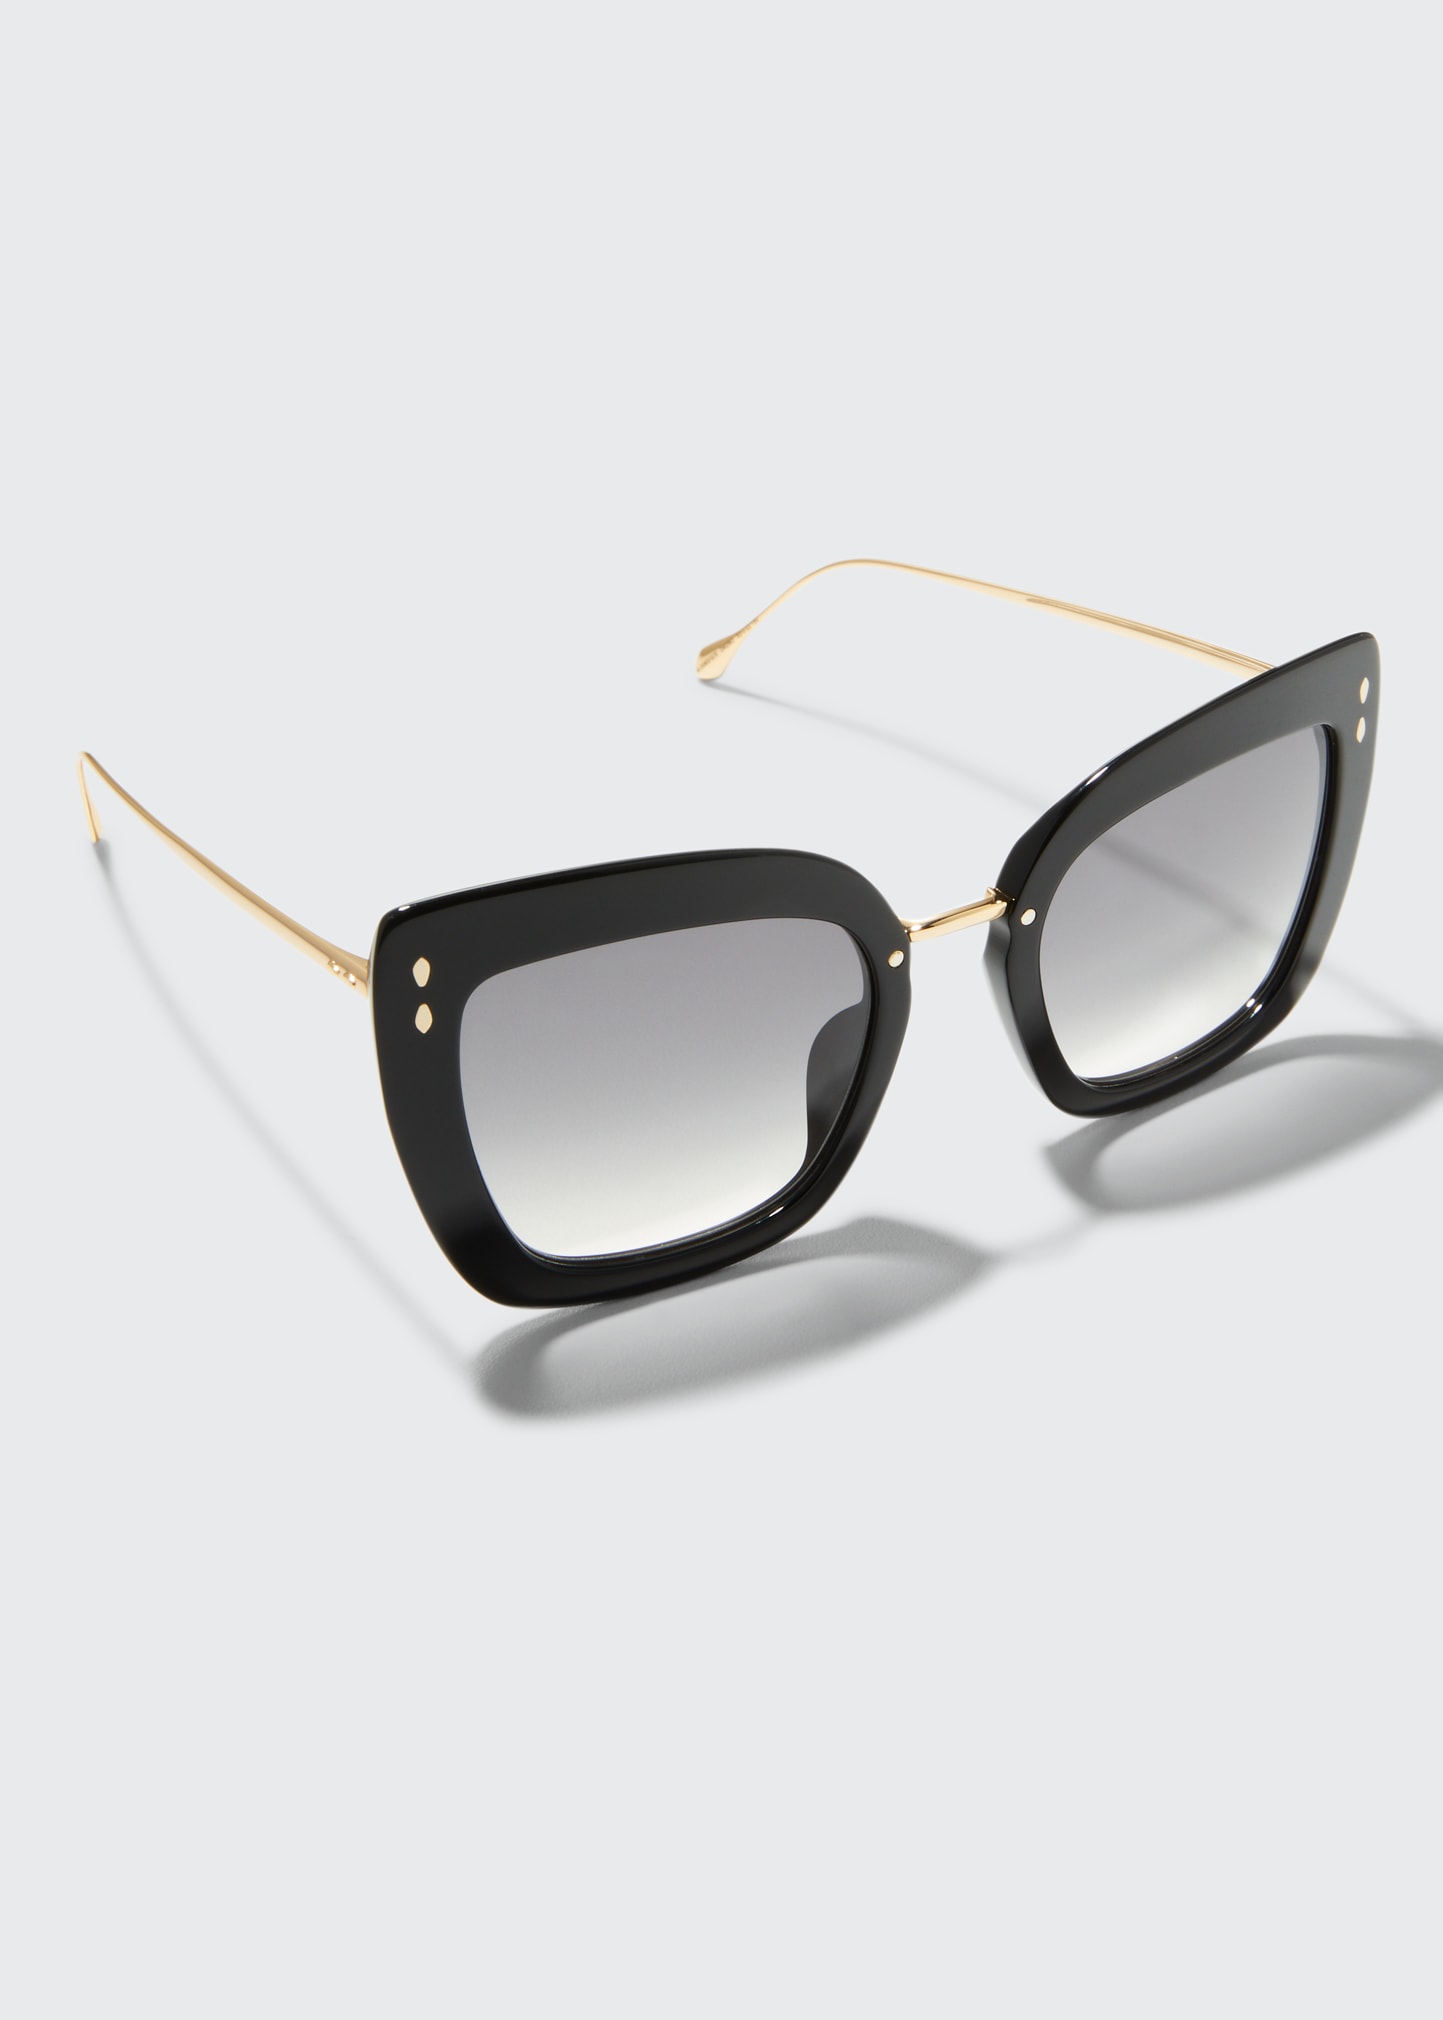 Isabel Marant Acetate & Metal Butterfly Sunglasses In Black / Gold